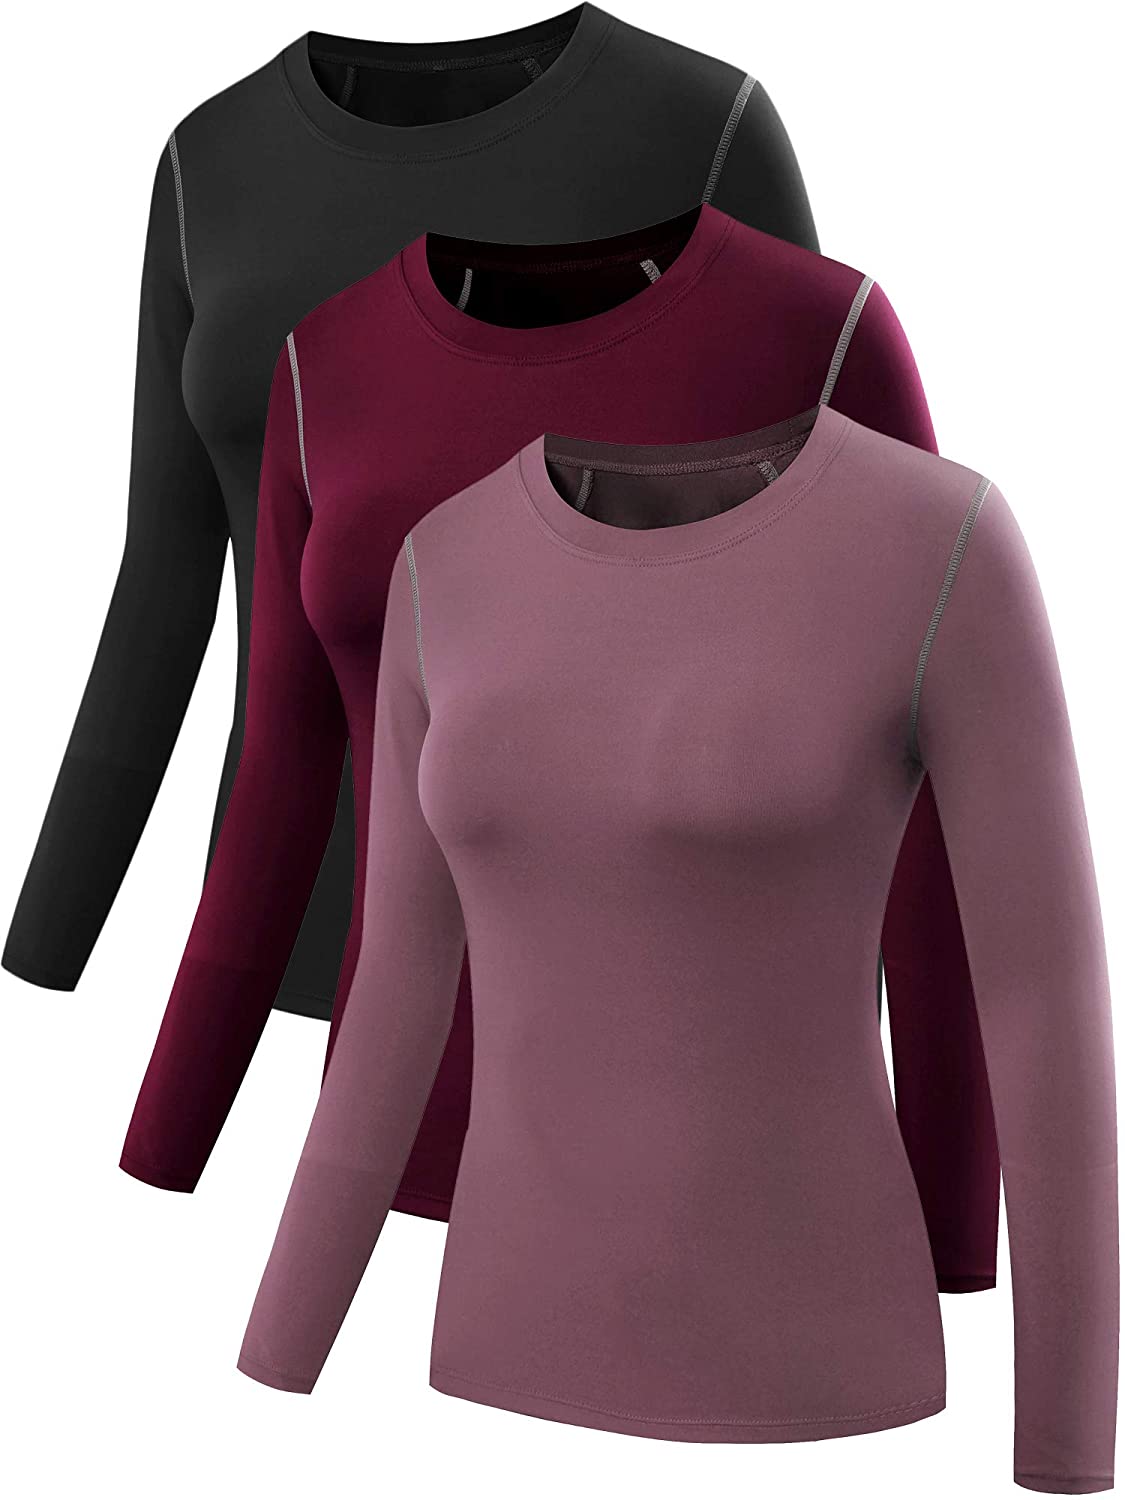 Neleus Women's 3 Pack Athletic Compression Long Sleeve T Shirt Dry